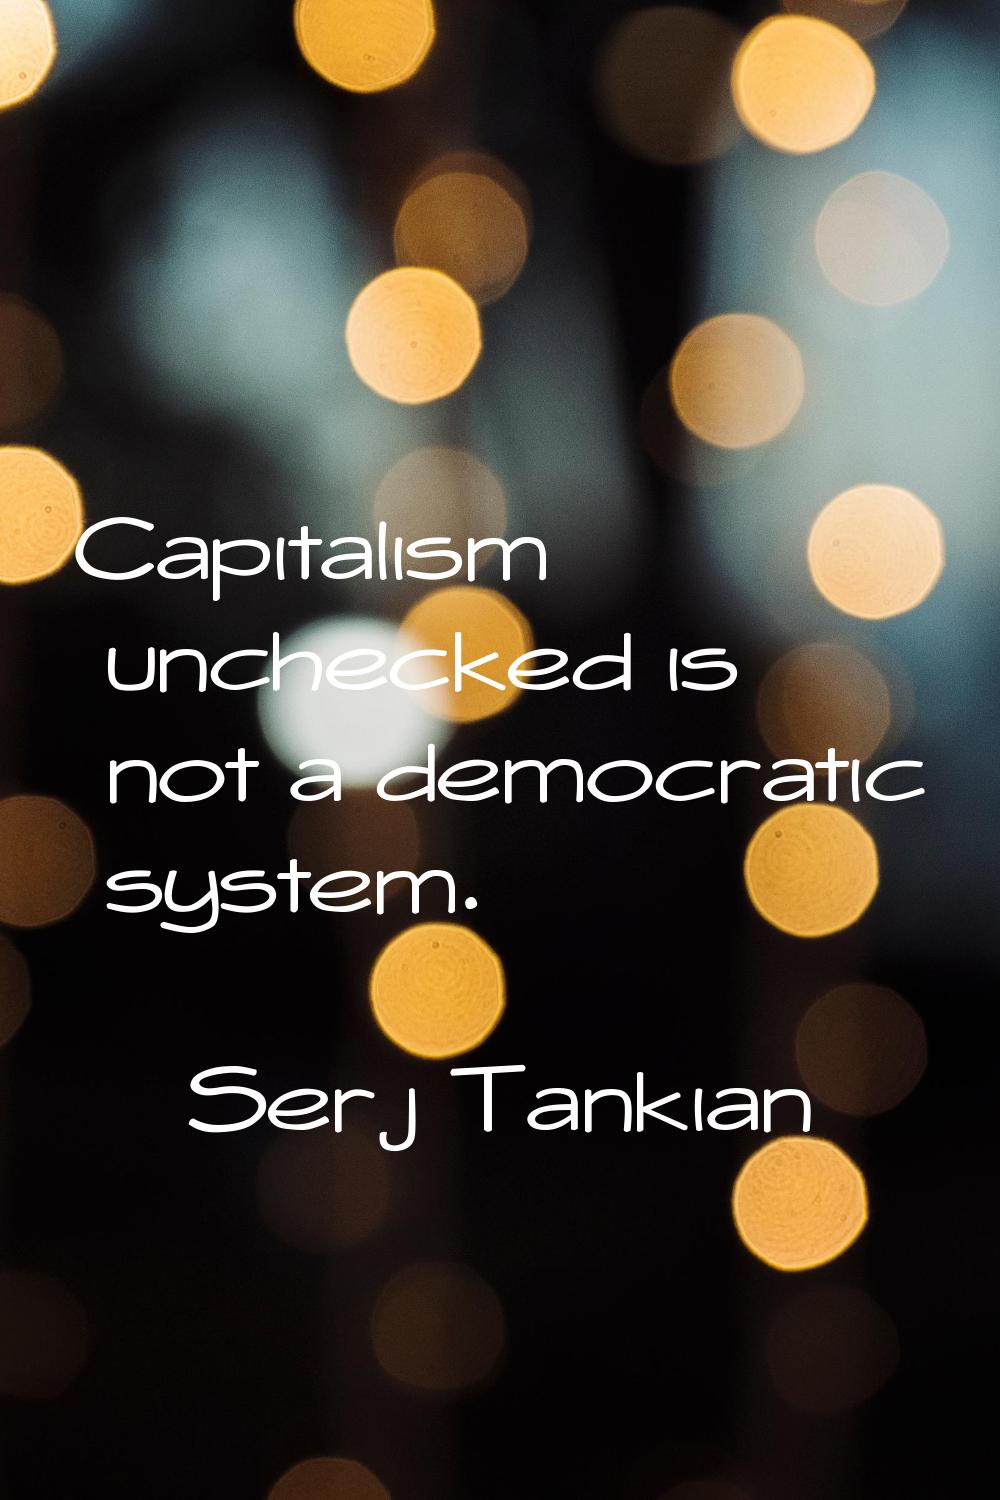 Capitalism unchecked is not a democratic system.